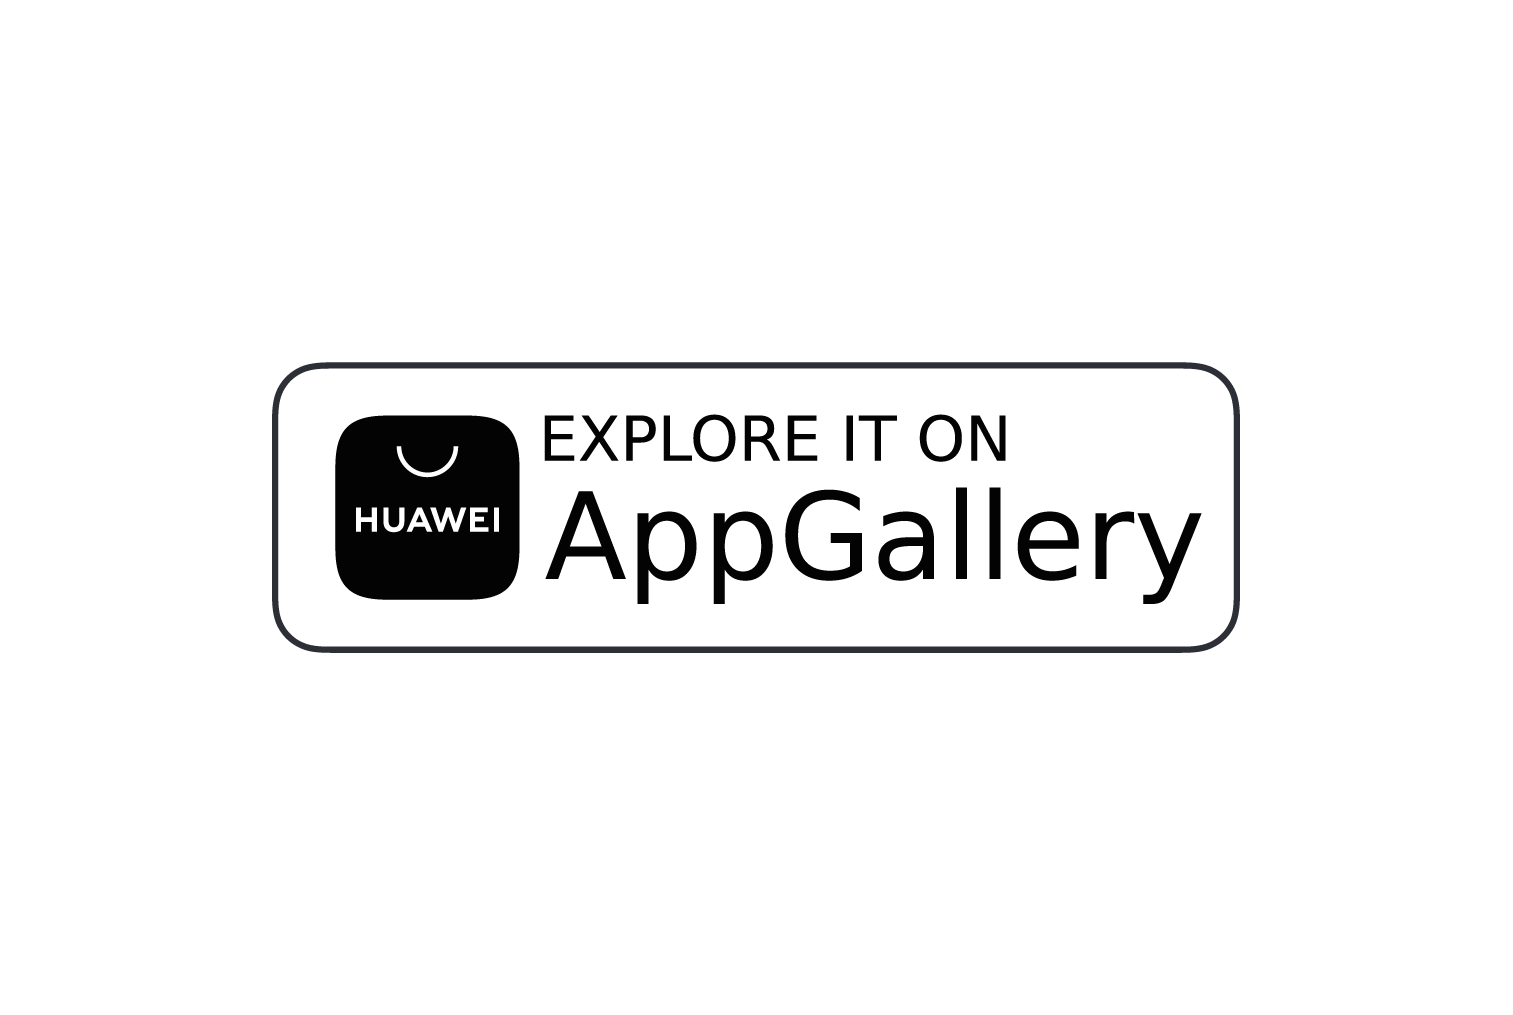 Appgallery 2